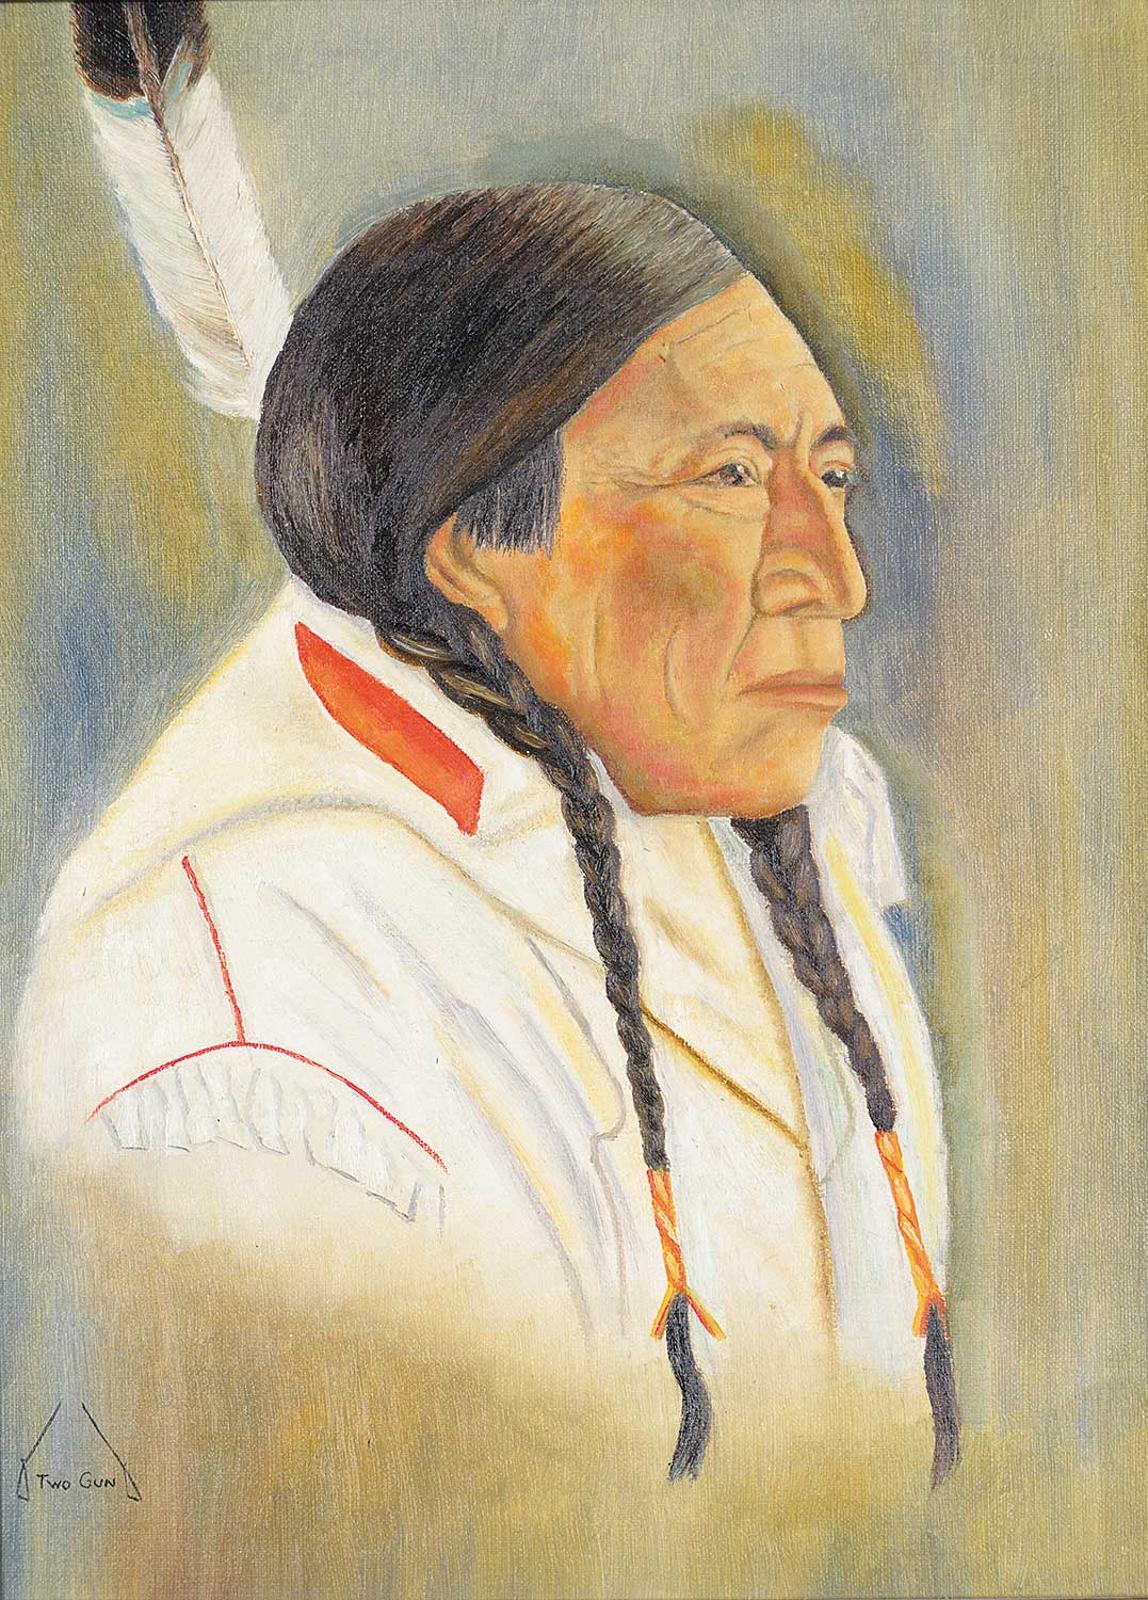 Percy [Two Gun] Plain Woman - Untitled - Indian with Eagle Feather